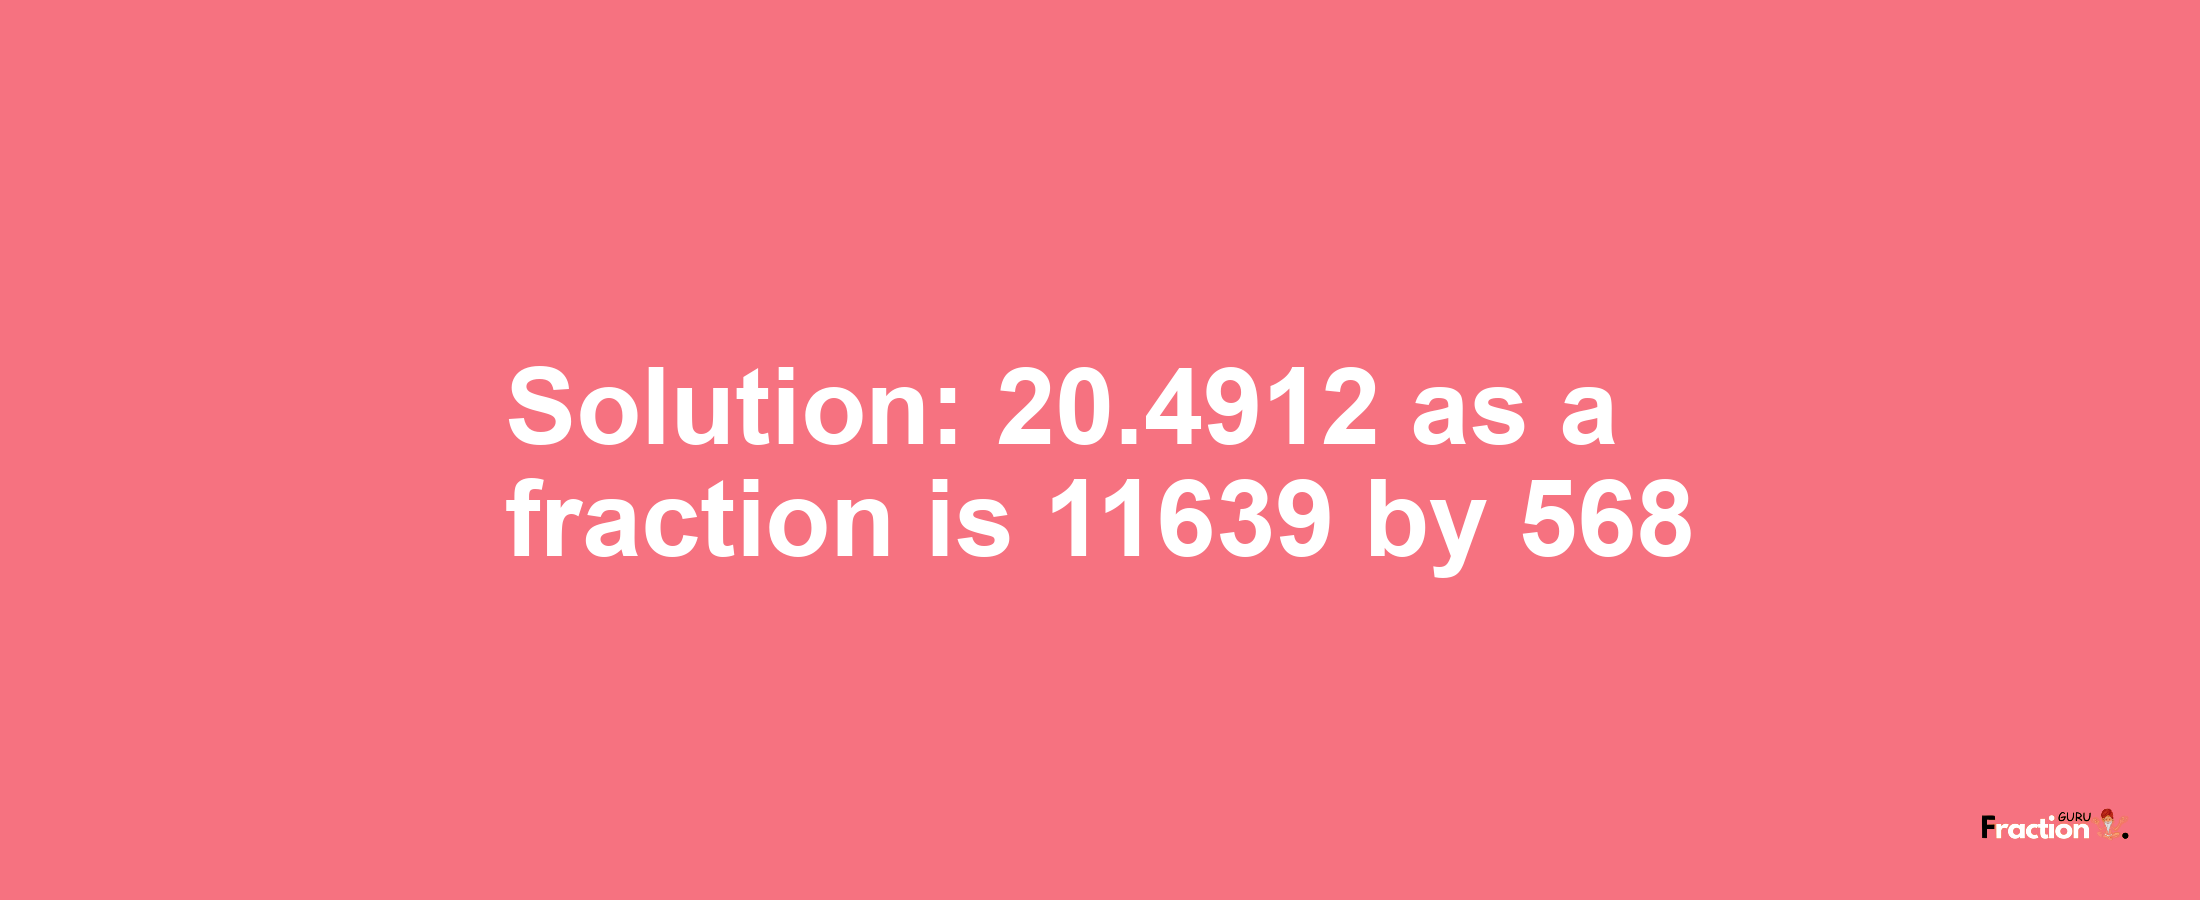 Solution:20.4912 as a fraction is 11639/568